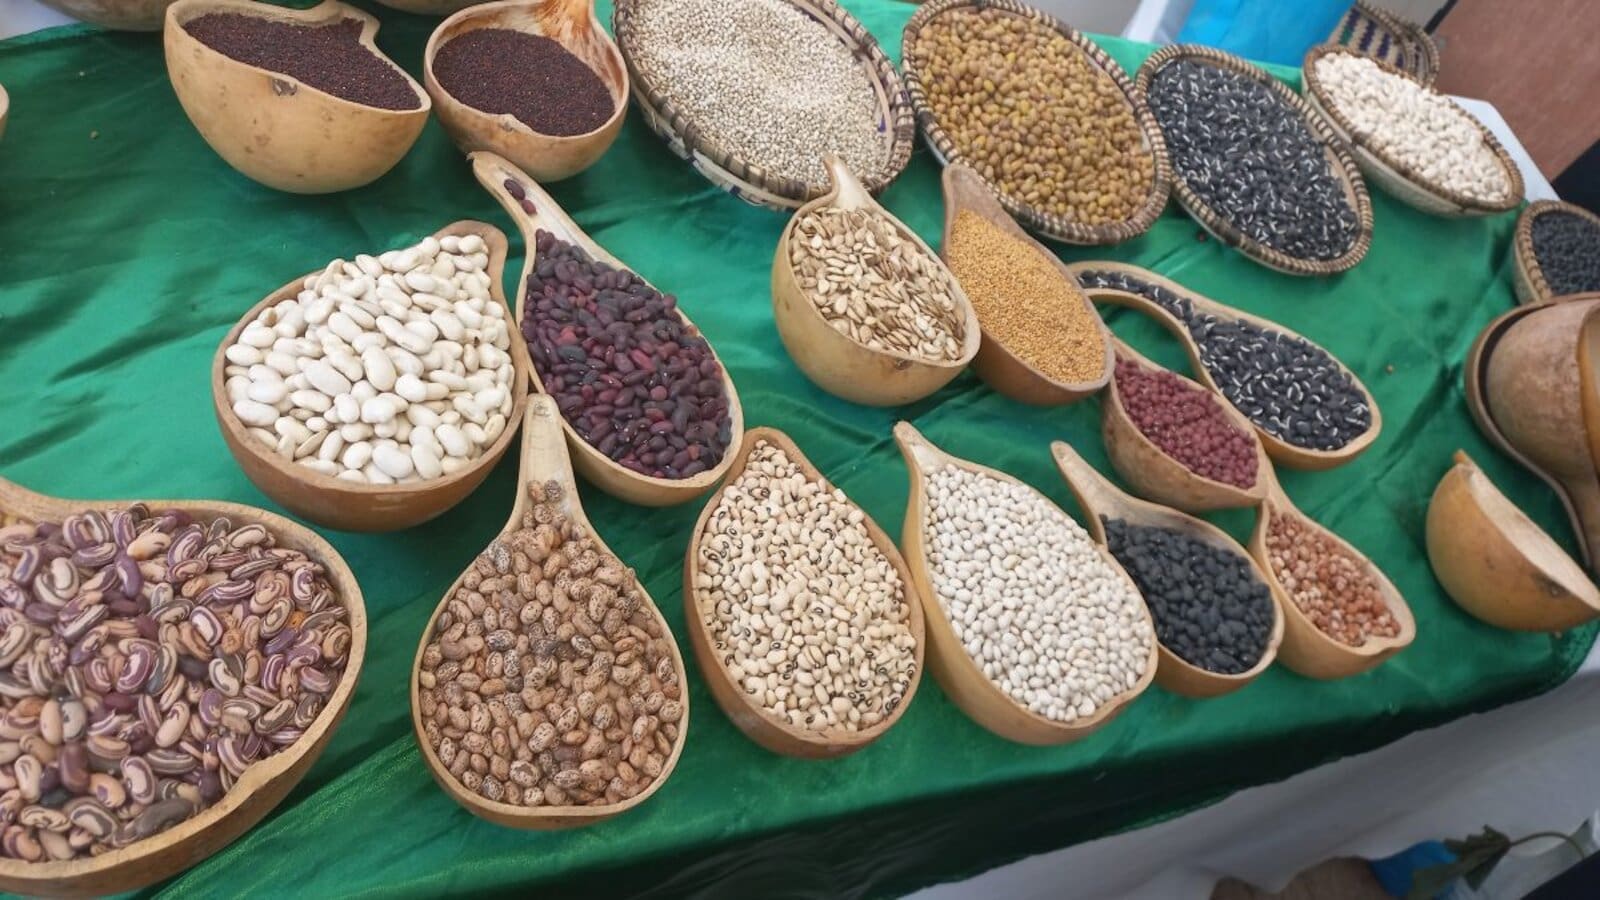 Tanzania bolsters efforts to achieve seed self-sufficiency by 2030